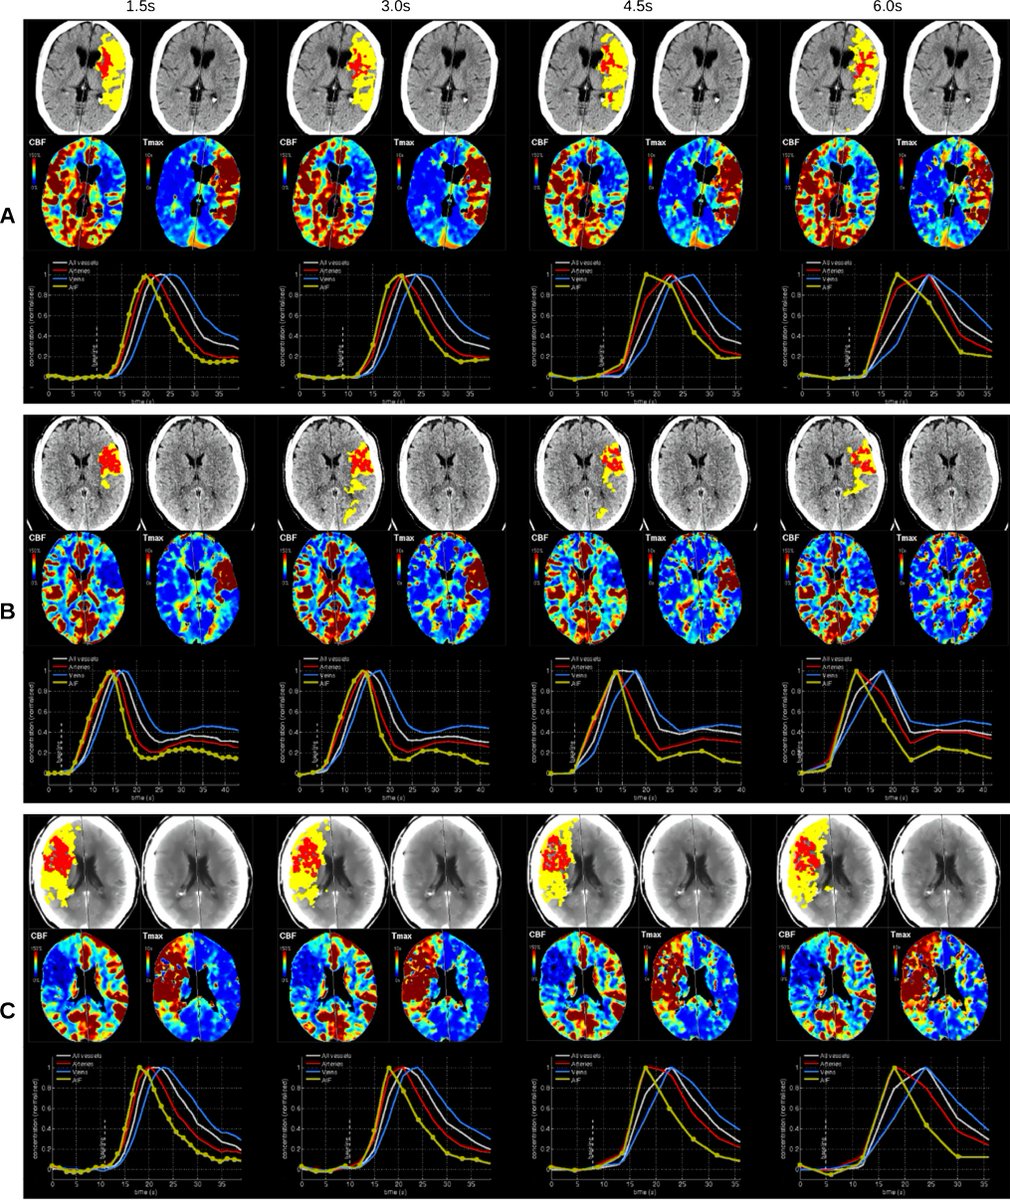 Rau, A., Reisert, M., Stein, T. et al. Impact of temporal resolution on perfusion metrics, therapy decision, and radiation dose reduction in brain CT perfusion in patients with suspected stroke. Neuroradiology 66, 749–759 (2024). doi.org/10.1007/s00234…